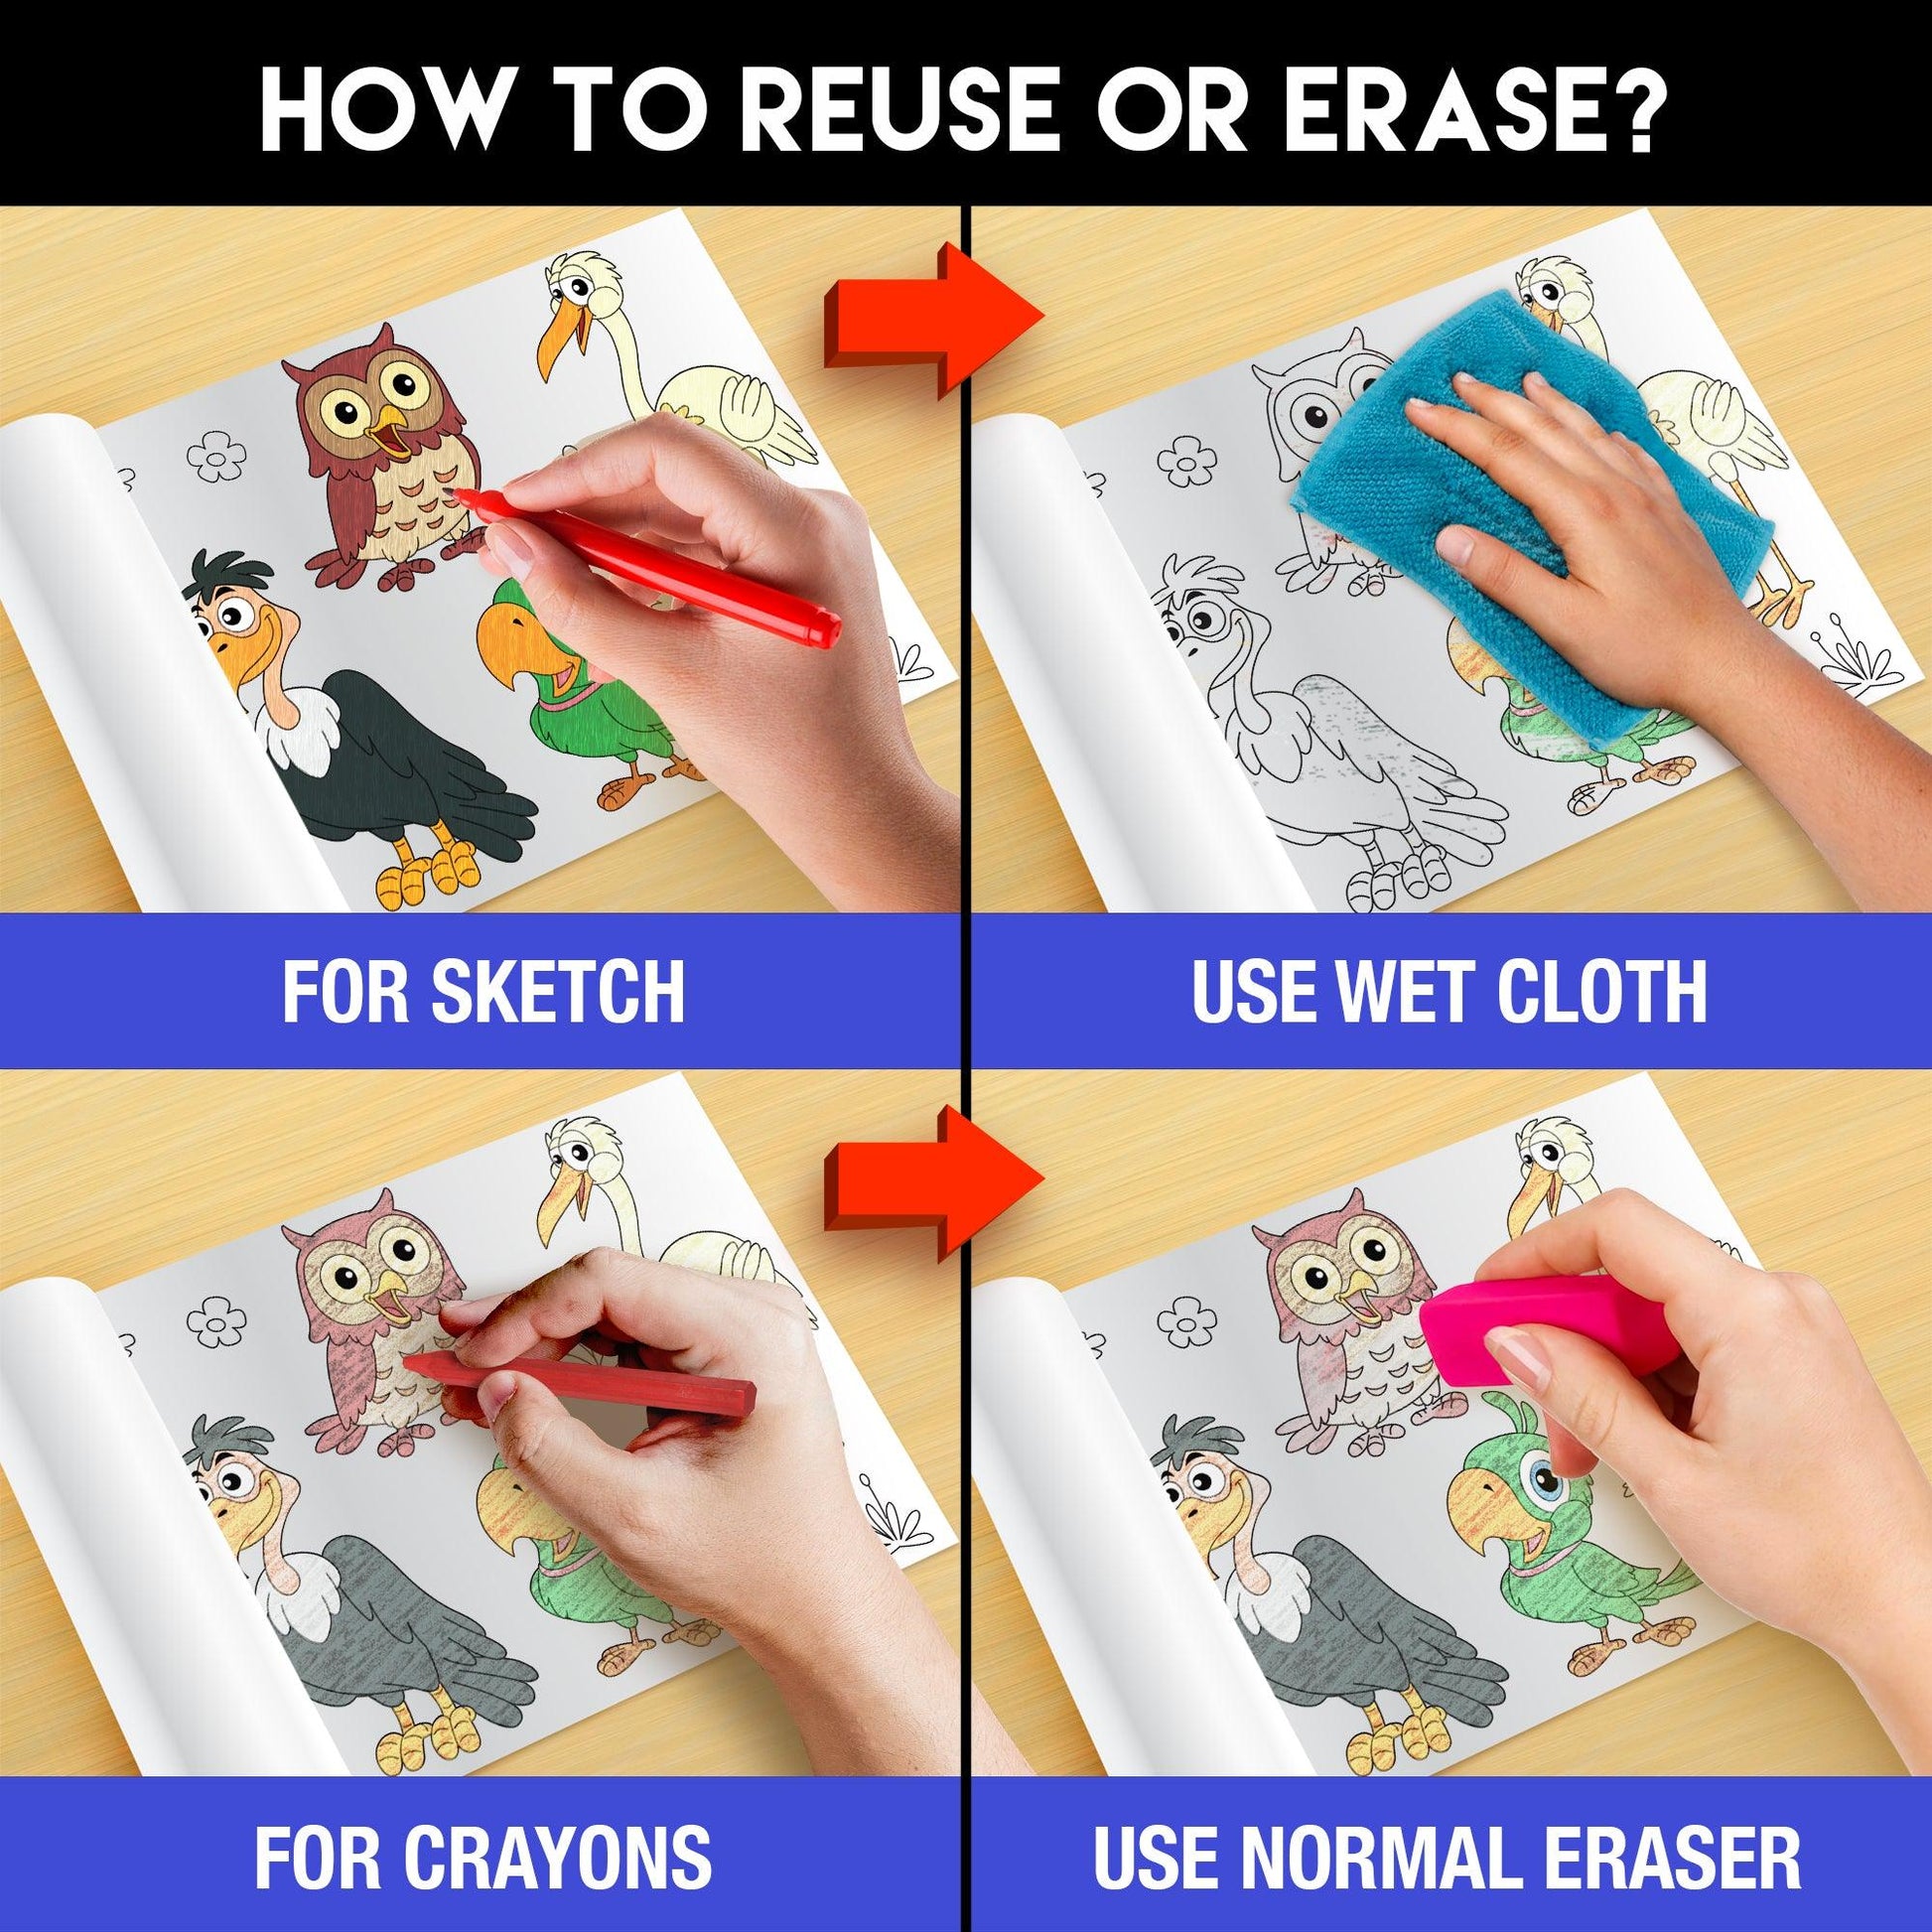 The image has a blue background with four pictures demonstrating how to reuse or erase: the first picture depicts sketching on the sheet, the second shows using a wet cloth to remove sketches, the third image displays crayons colouring on the sheet, and the fourth image illustrates erasing crayons with a regular eraser.